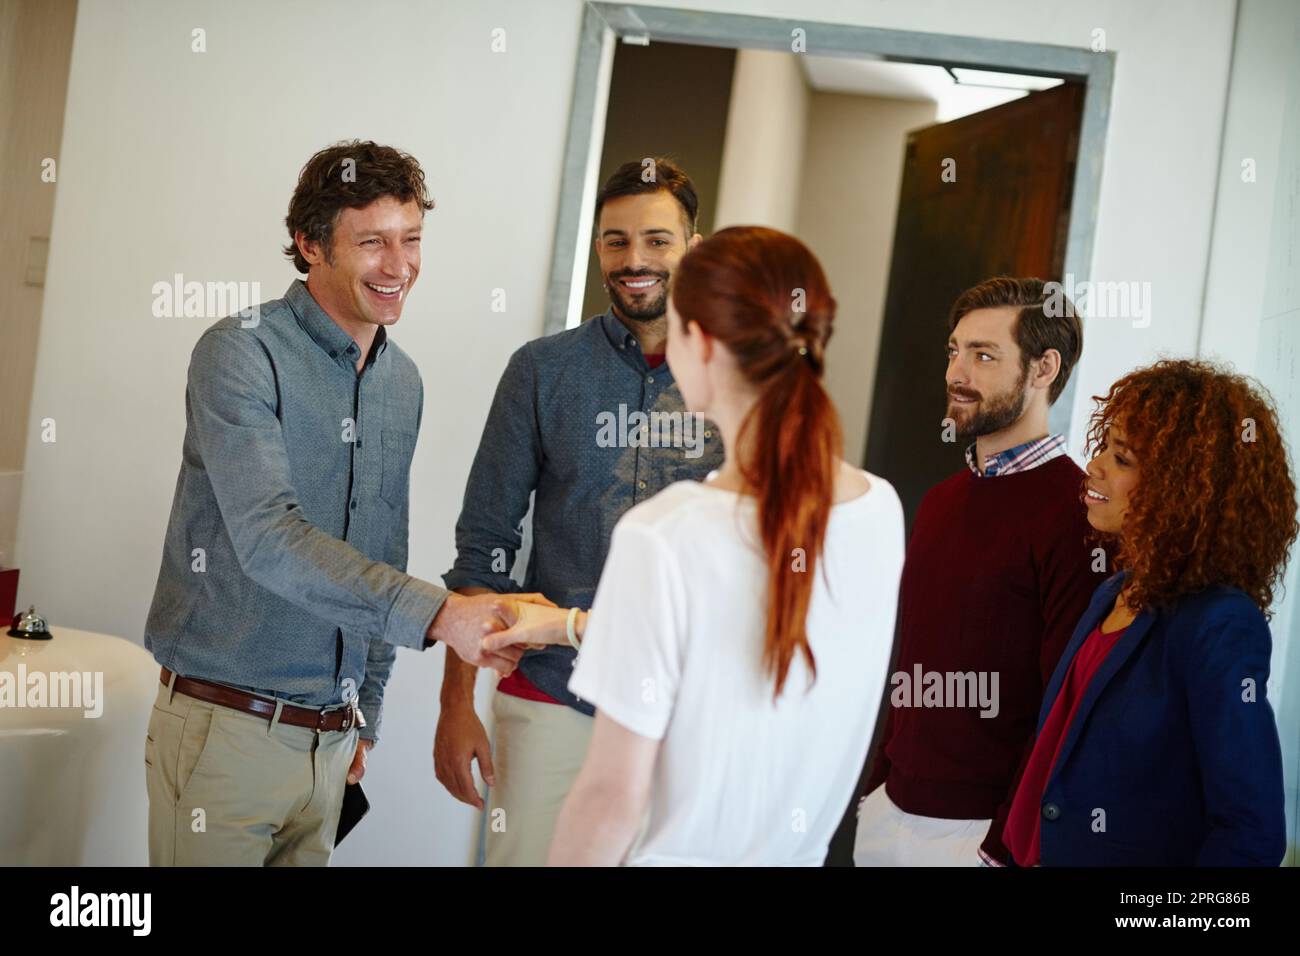 We cant wait to hear your ideas. a young businesswoman being introduced to her new coworkers in the office. Stock Photo